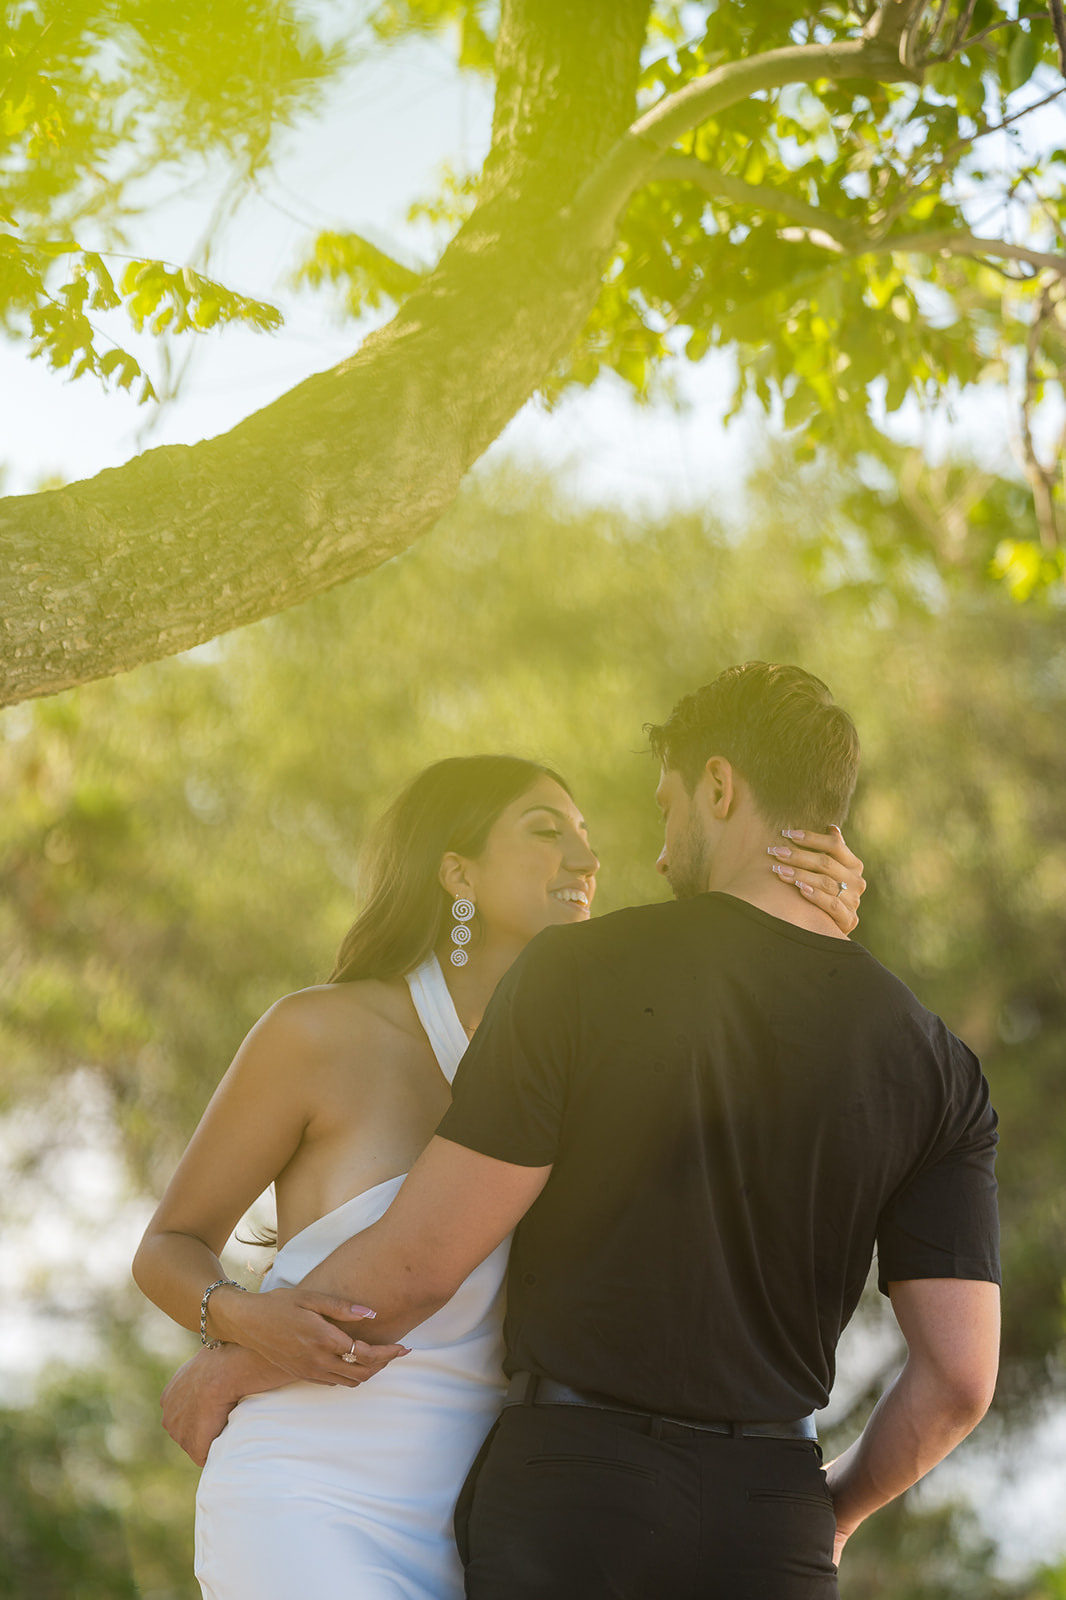 ThomasKim_photography A man and woman embrace during their V & J engagement session under a tree.